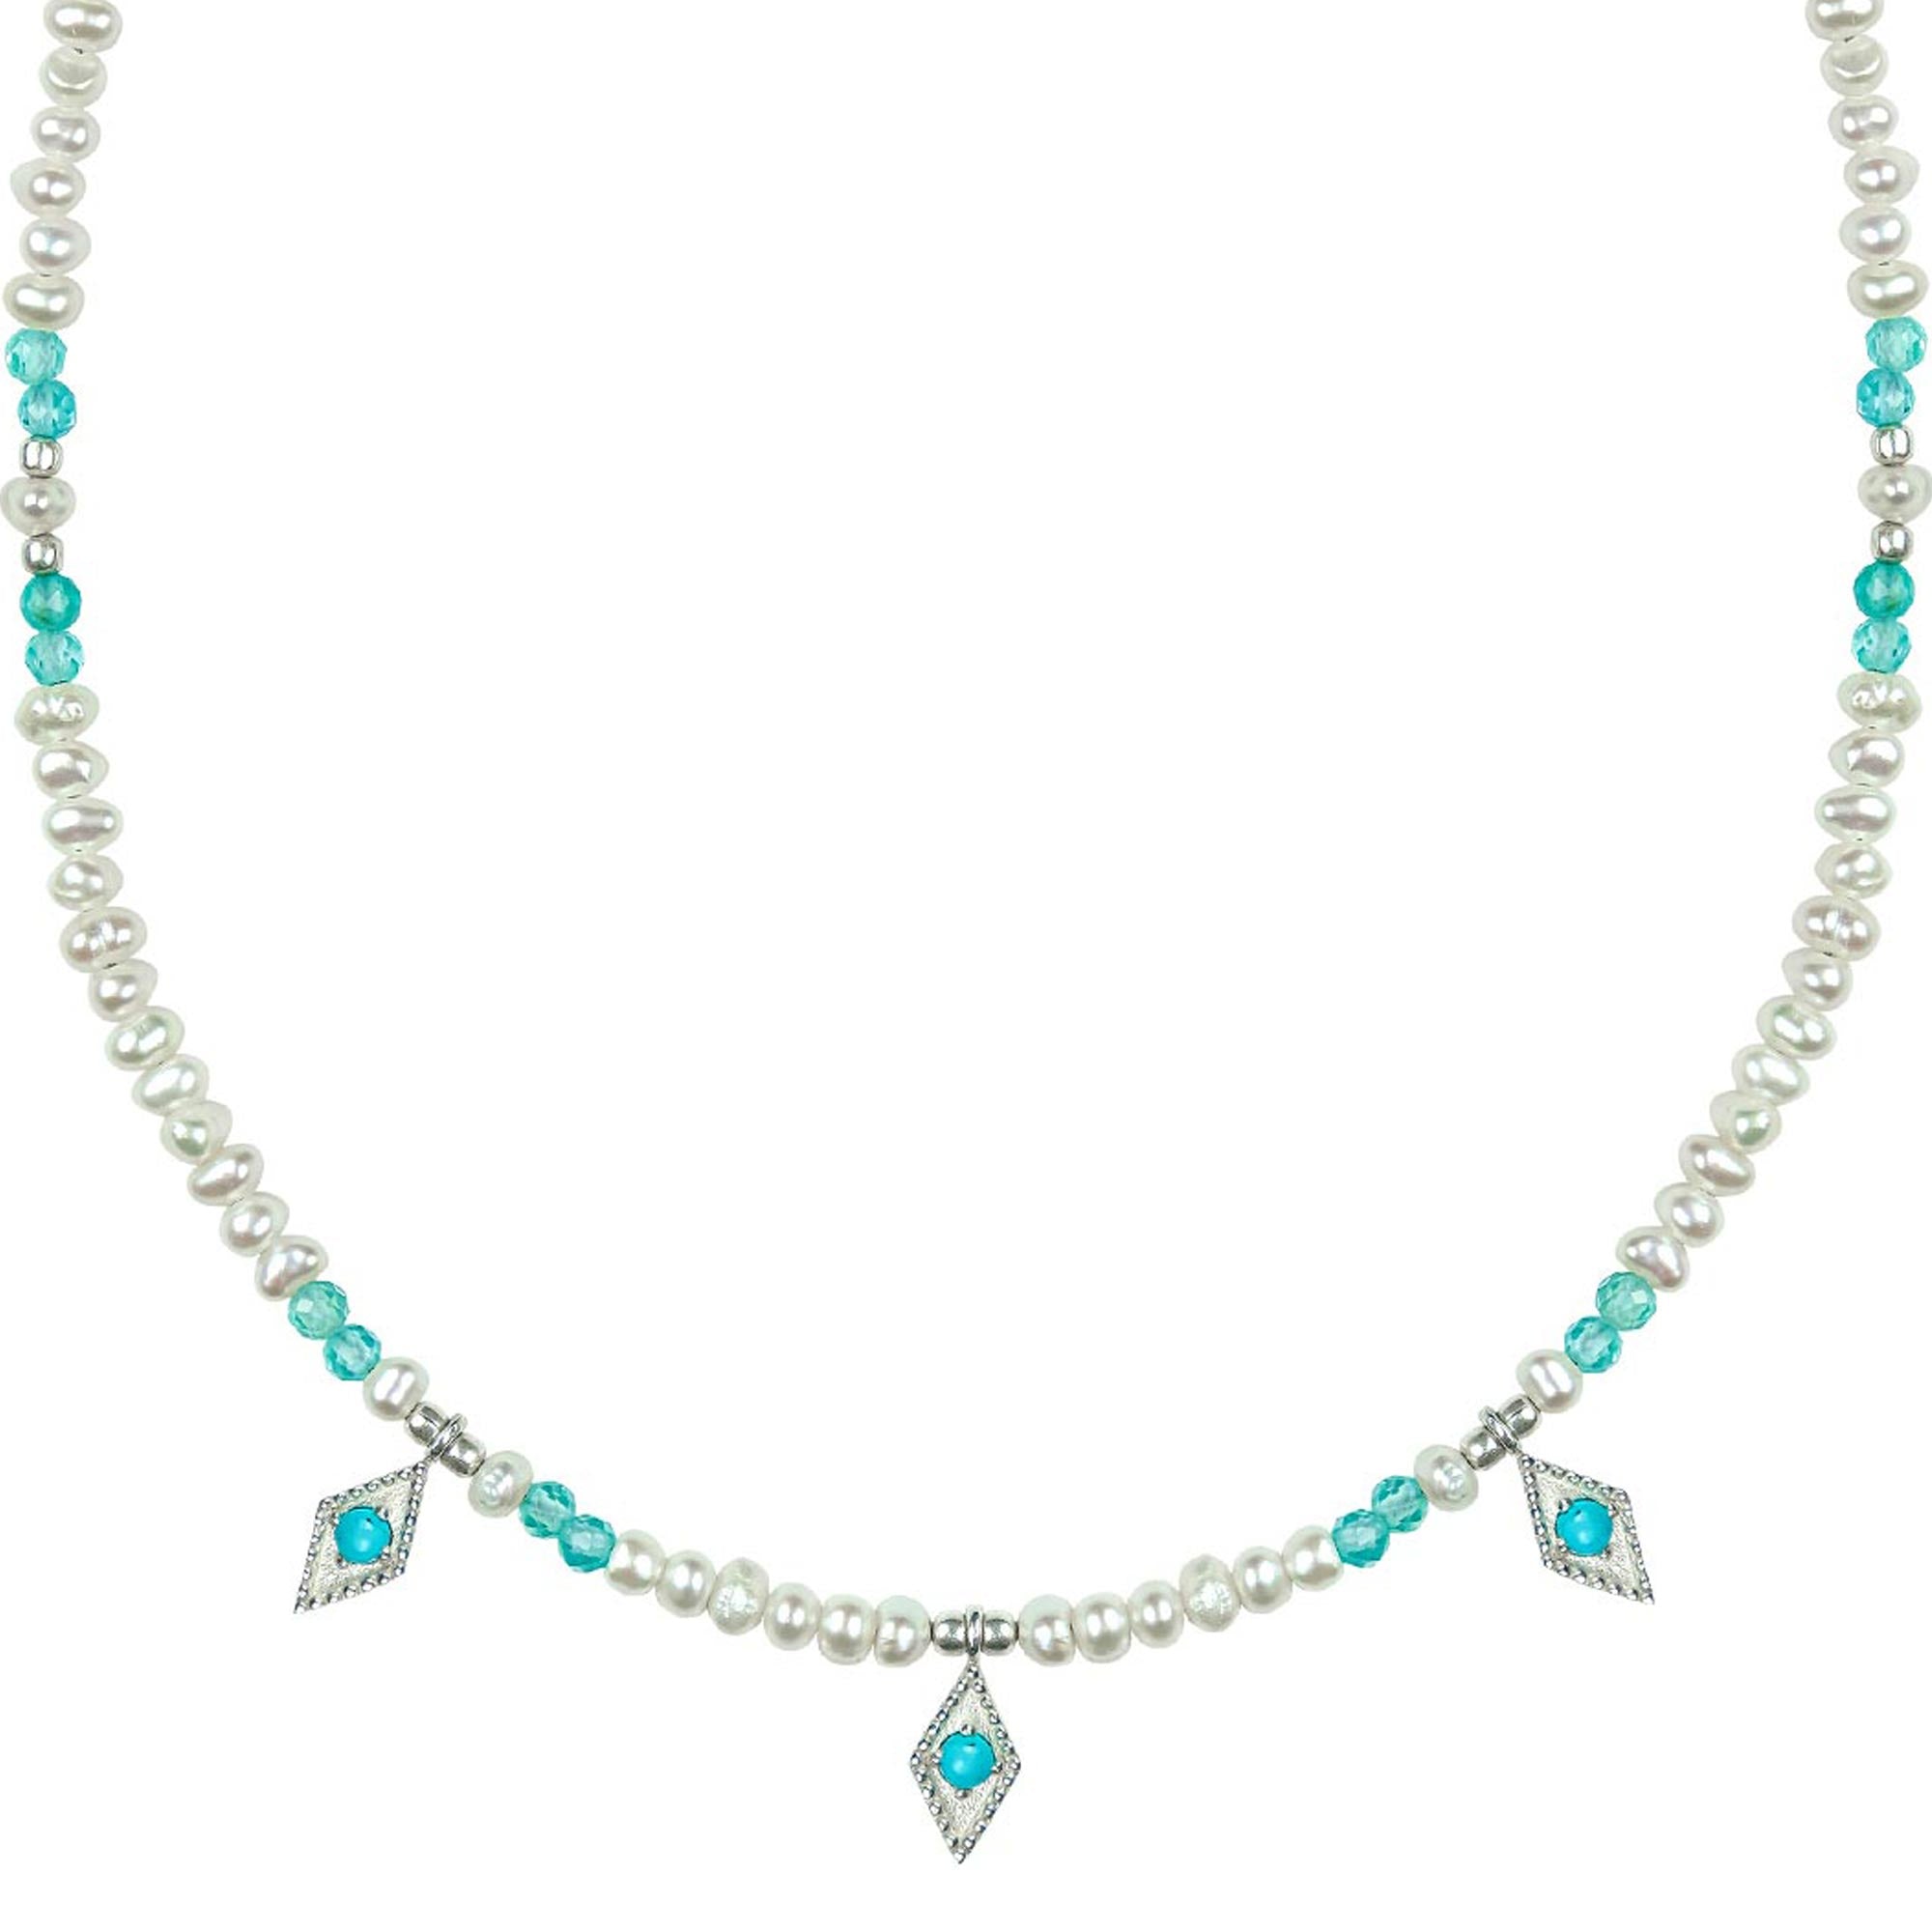 Pearl and Apatite Beaded Necklace